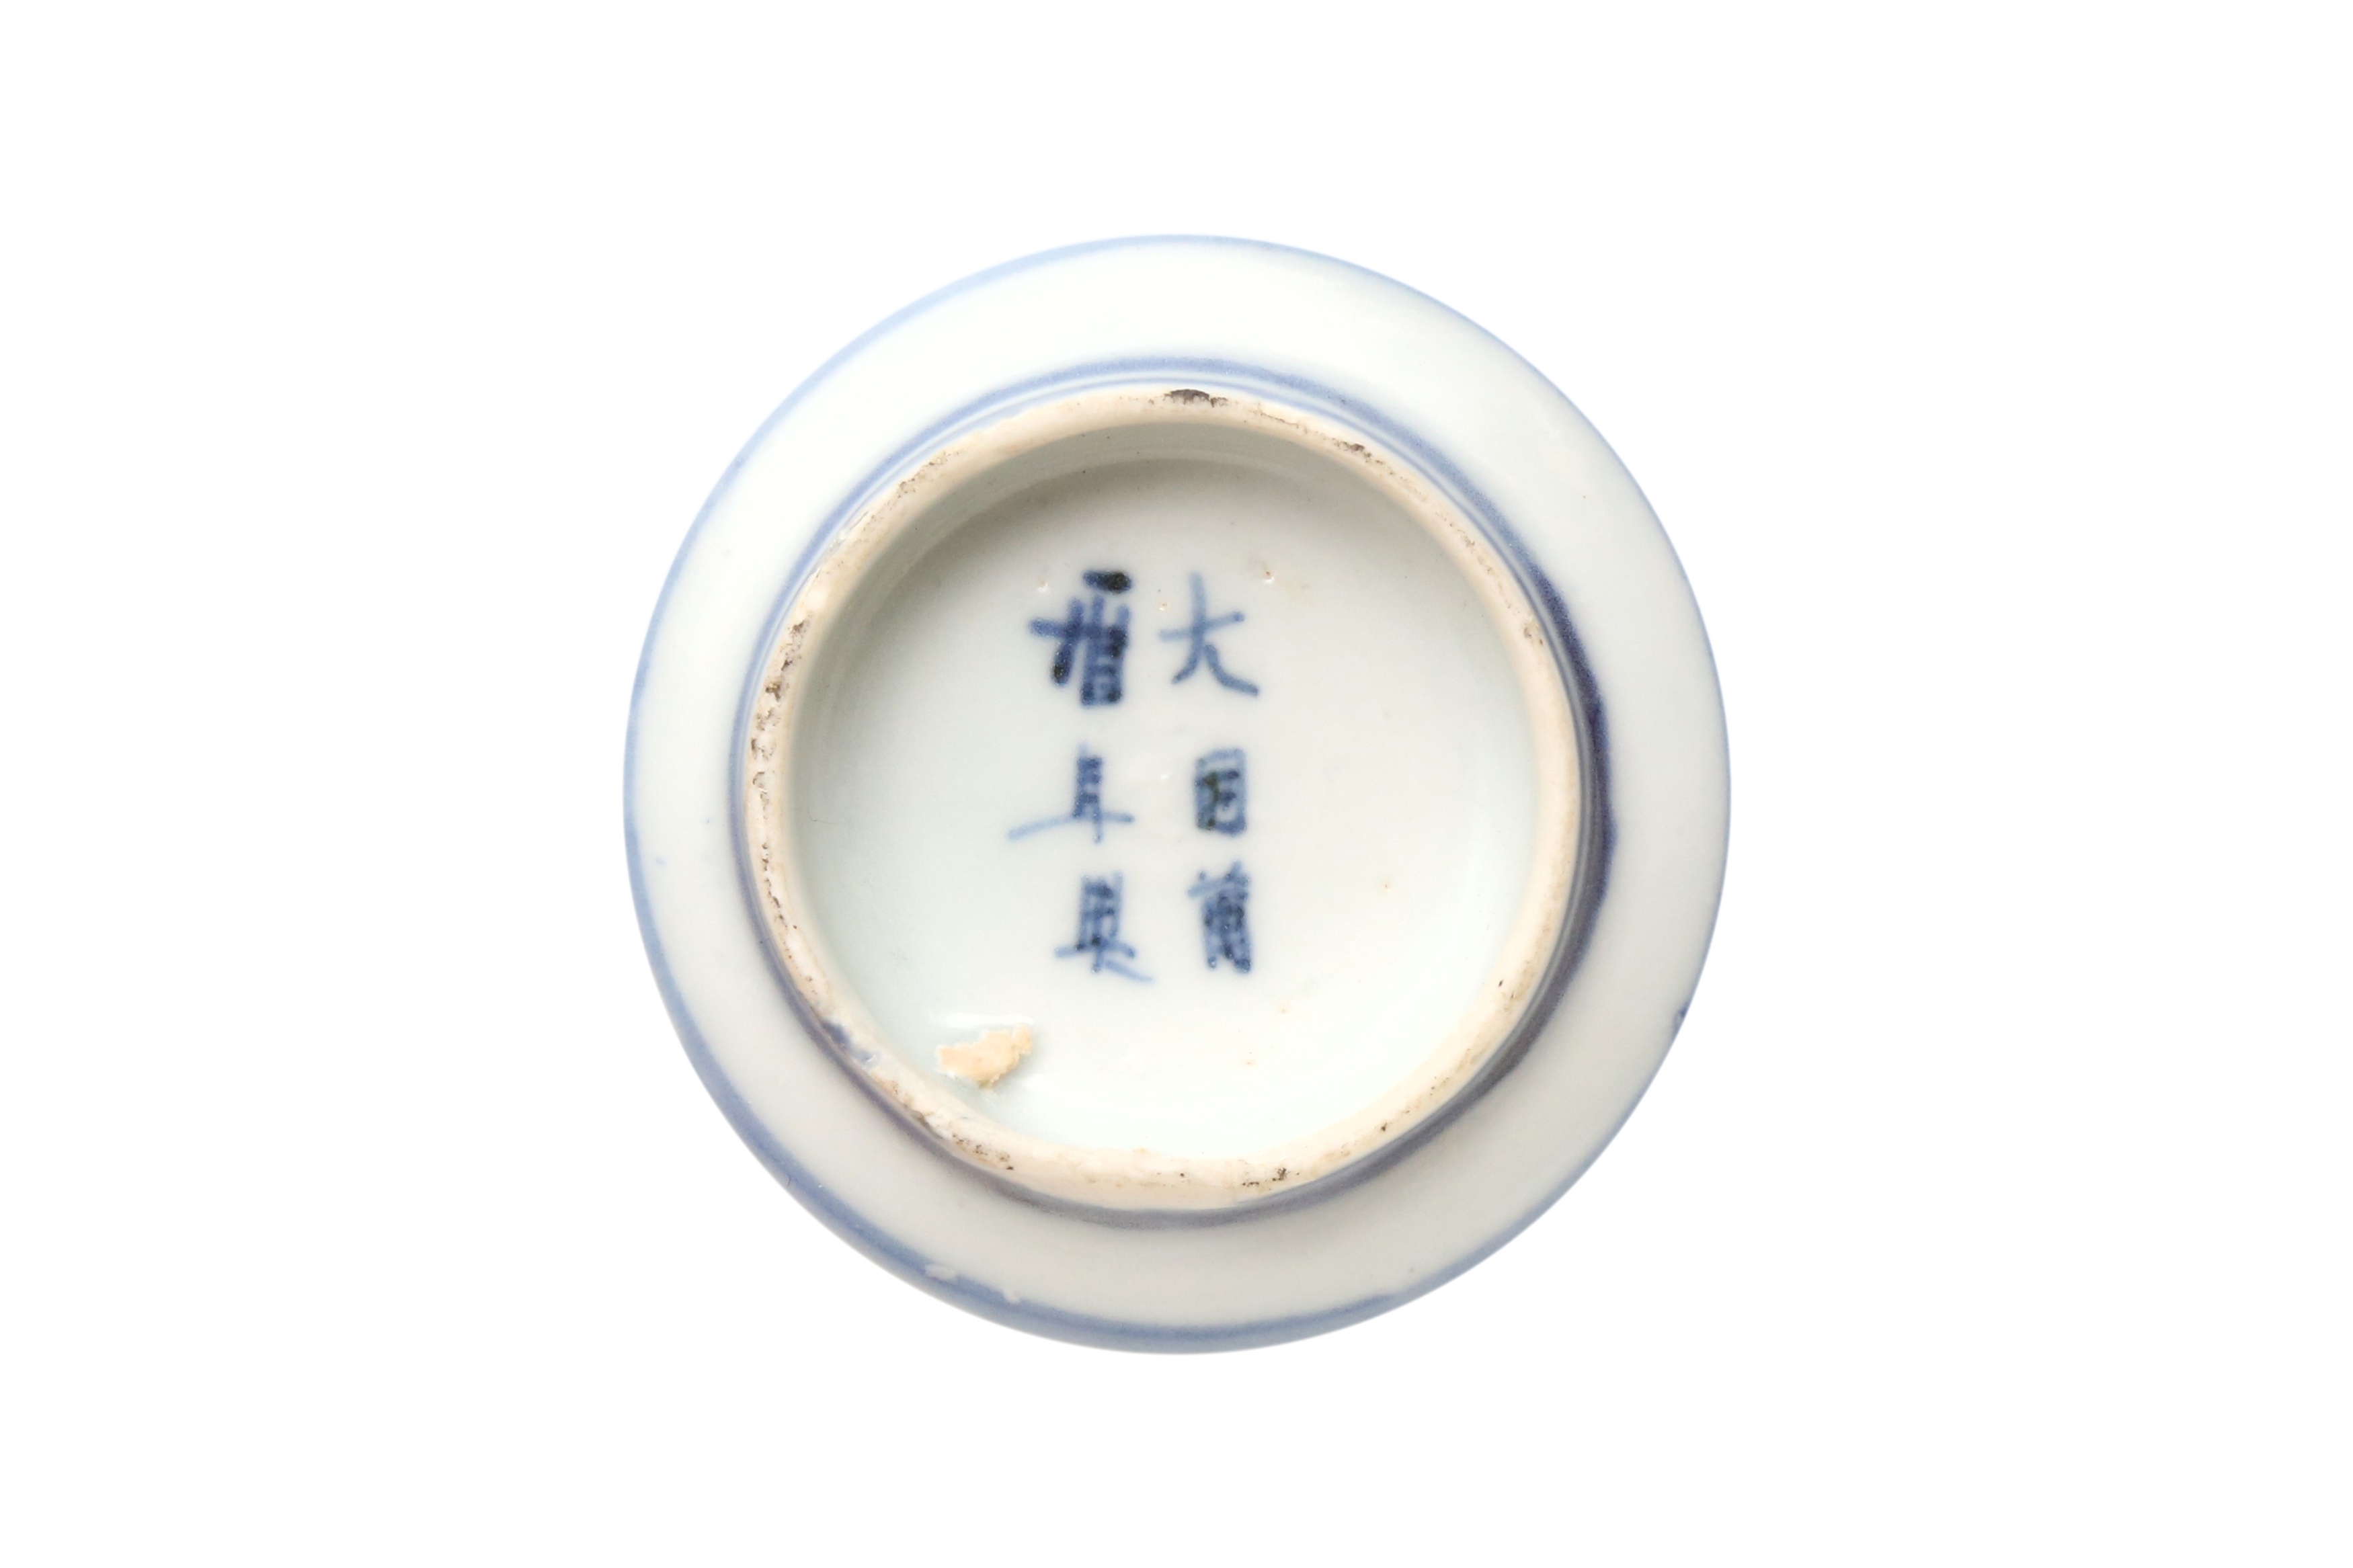 A PAIR OF CHINESE BLUE AND WHITE 'BIRD AND PEACH' BOWLS 明萬曆 青花鳥果紋圖盌 - Image 2 of 3